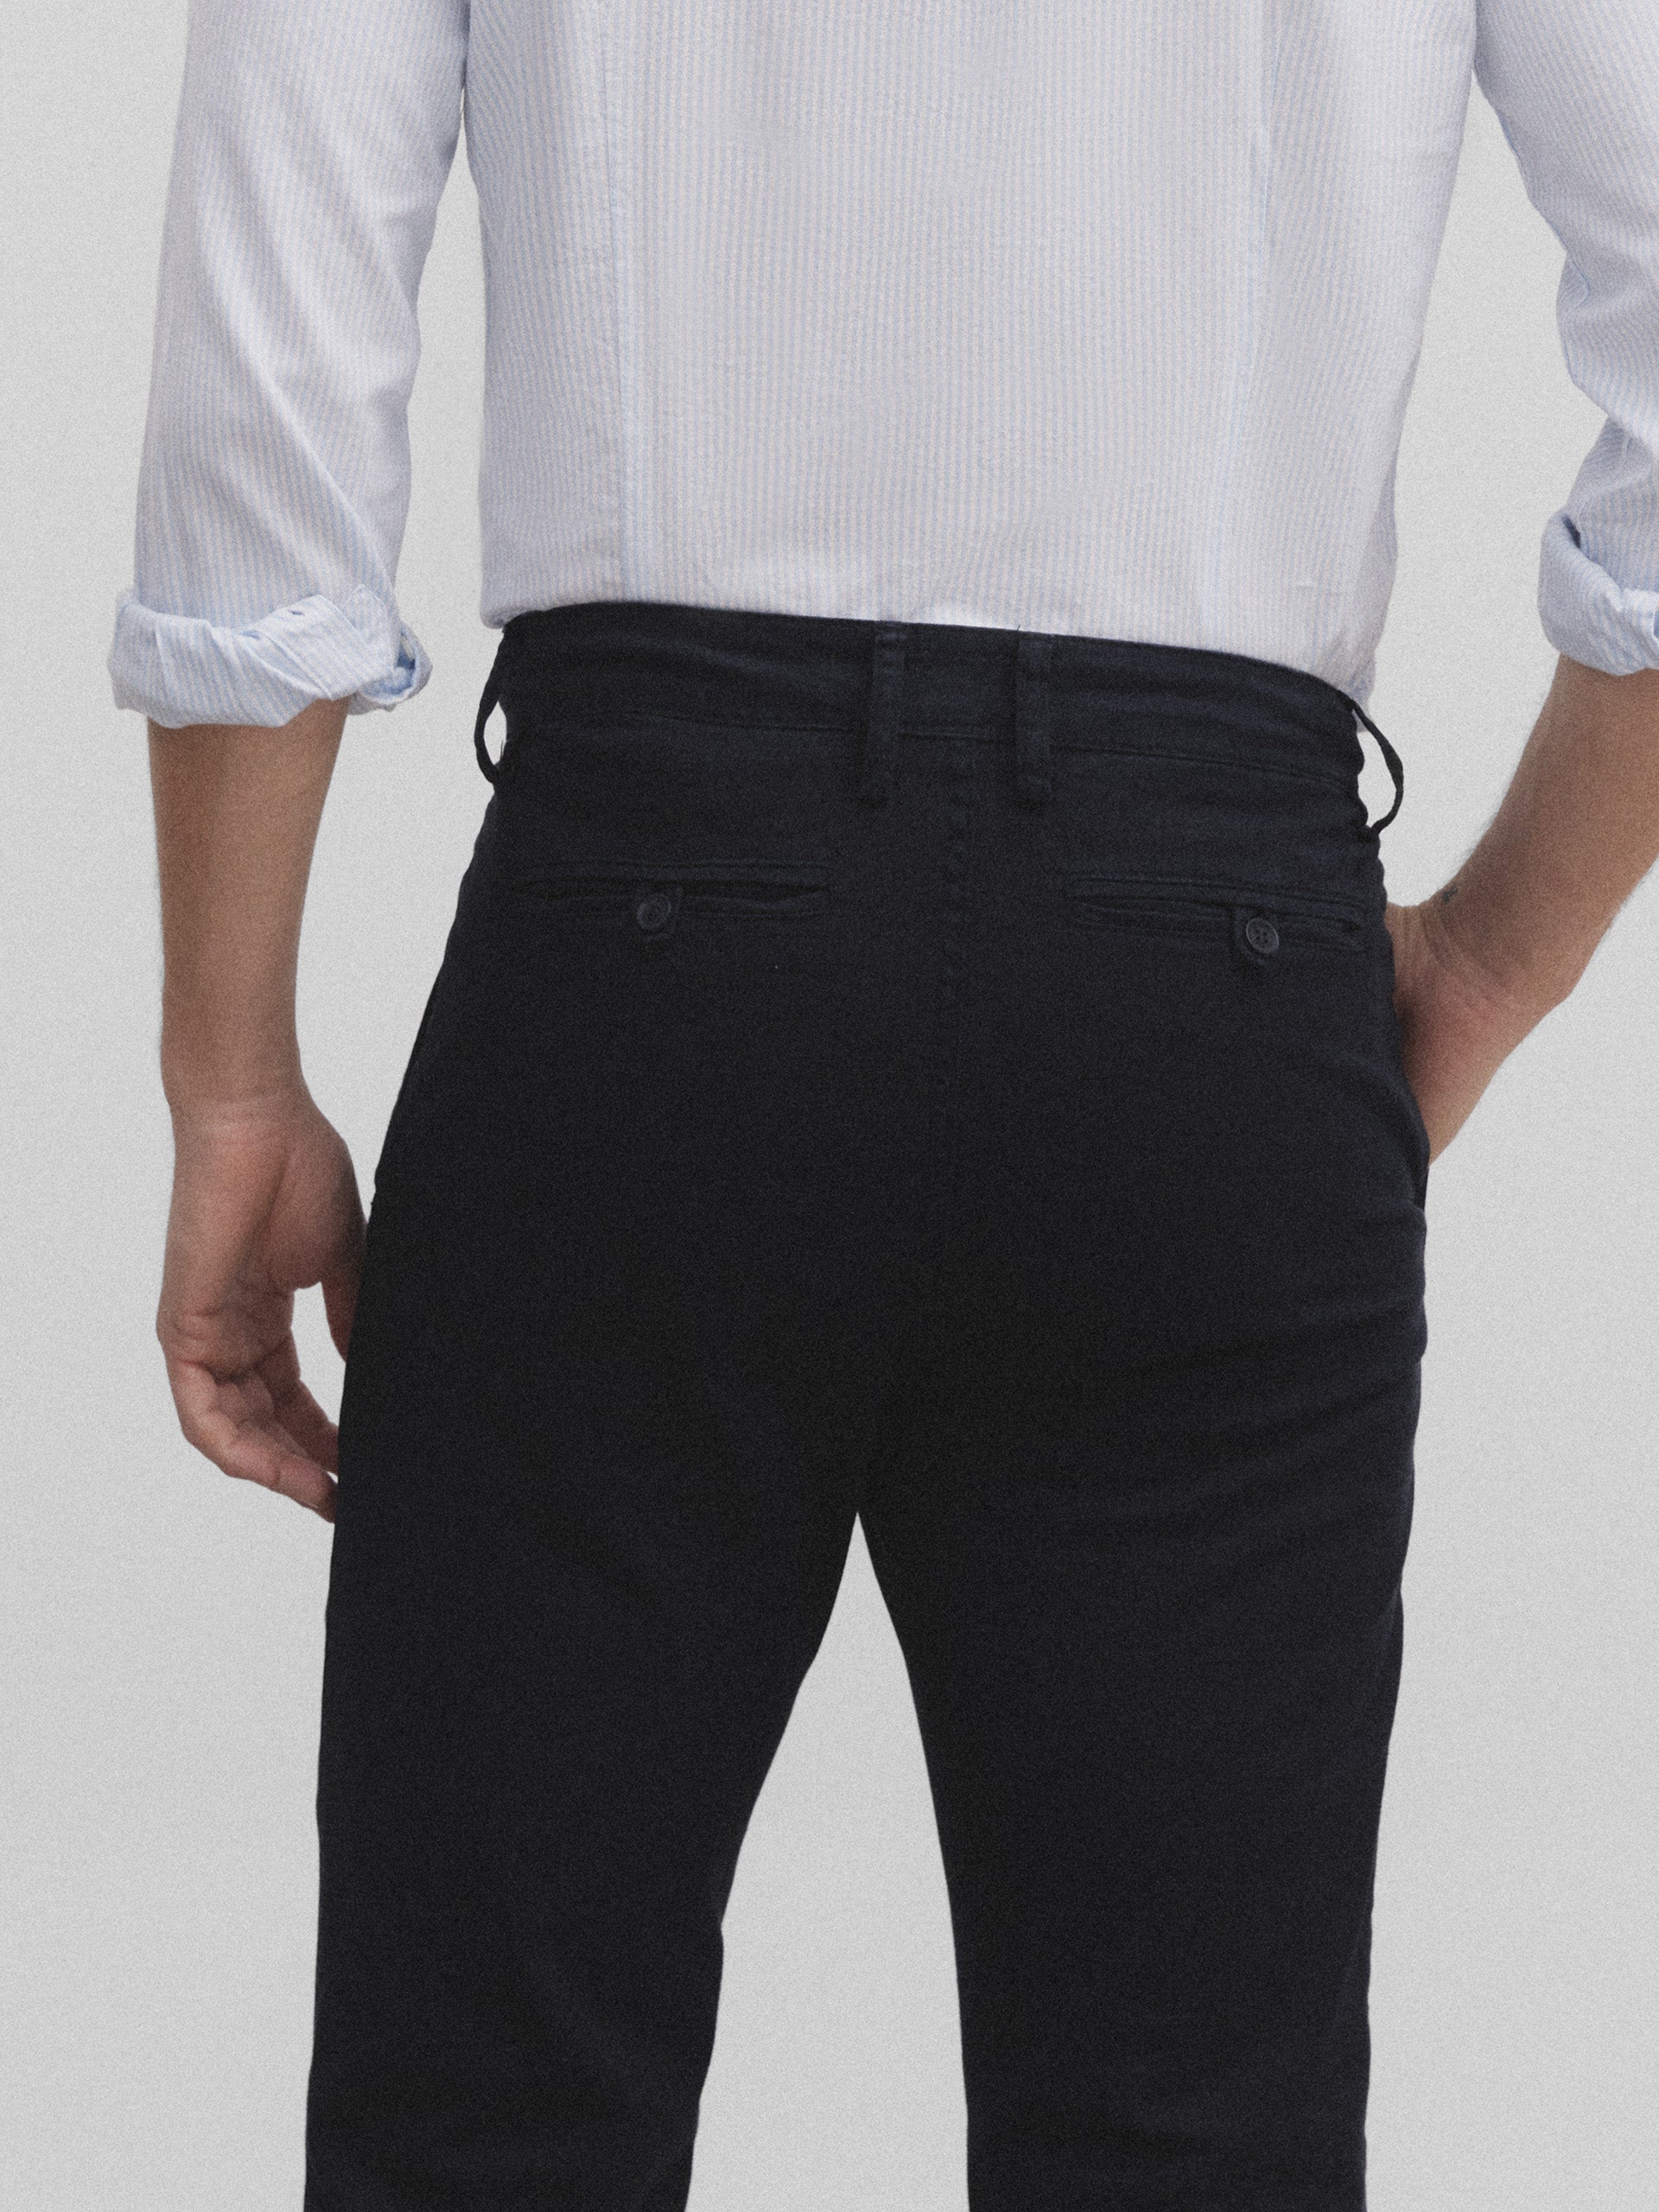 Navy blue extended chino sport pants